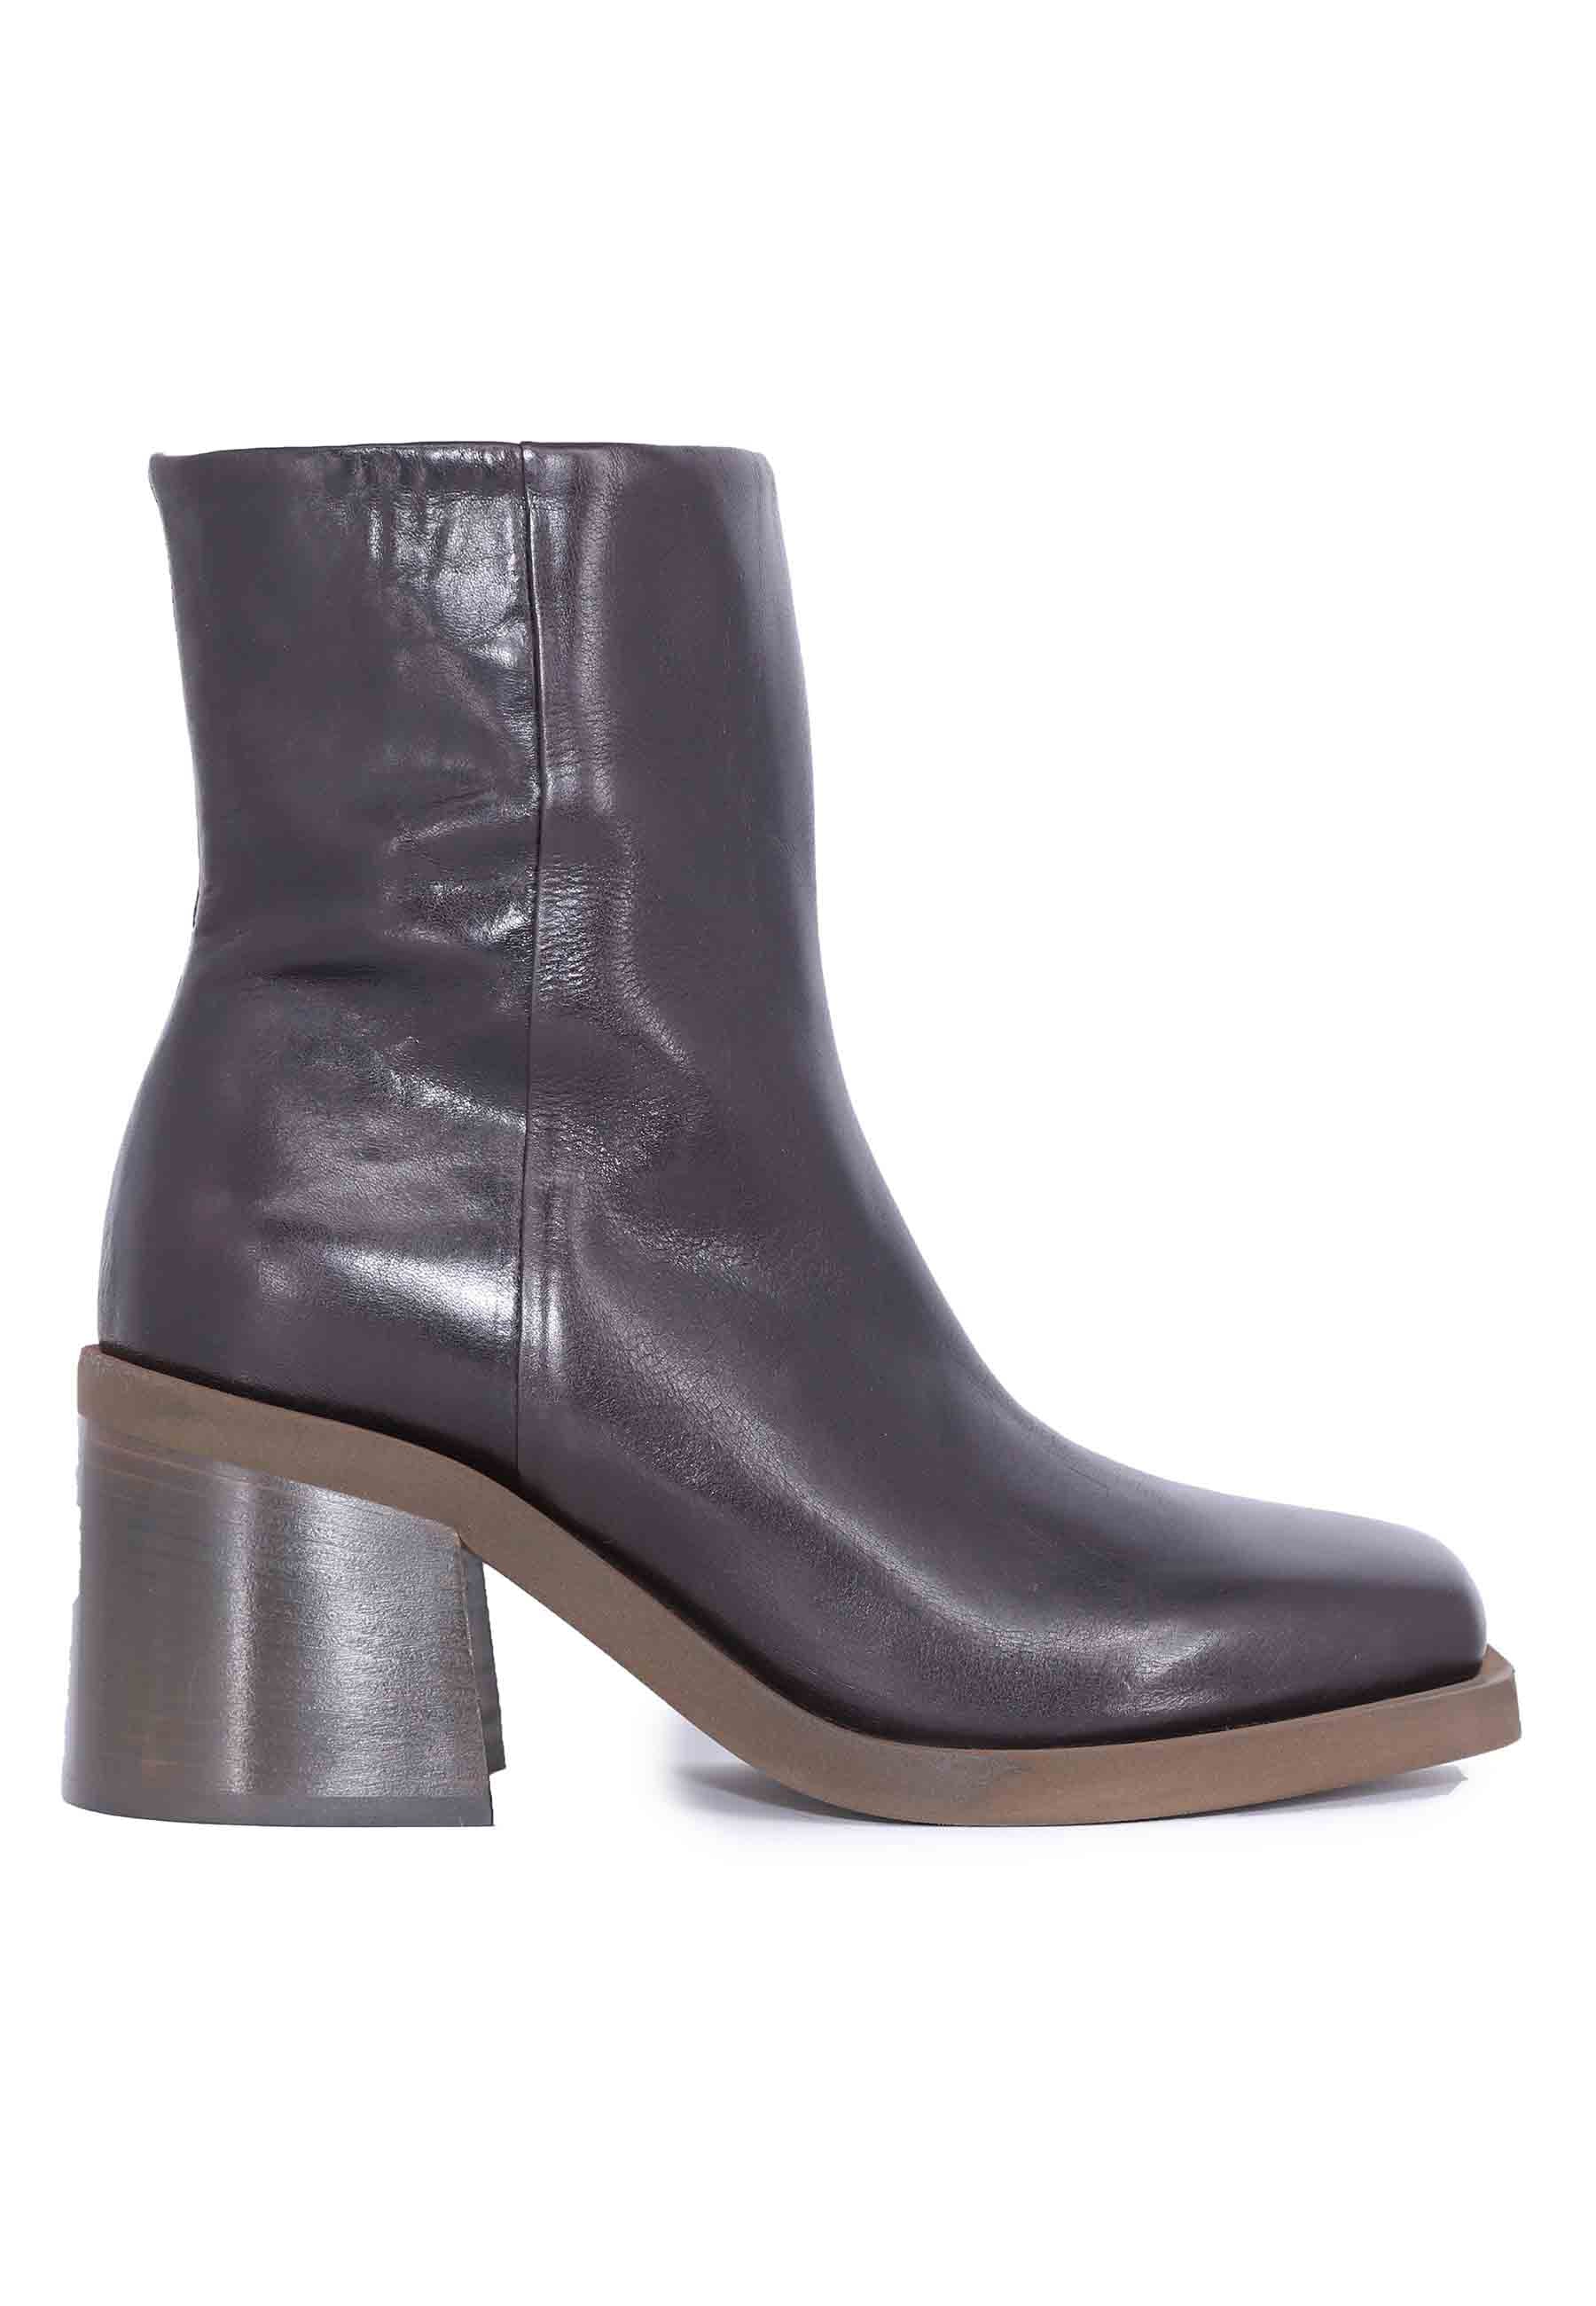 Women's ankle boots in brown shiny leather with square toe